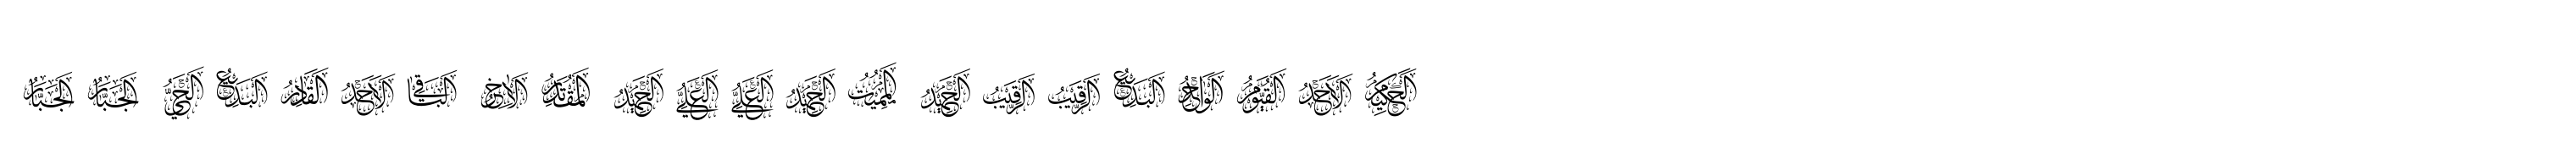 99 Names of ALLAH Attached